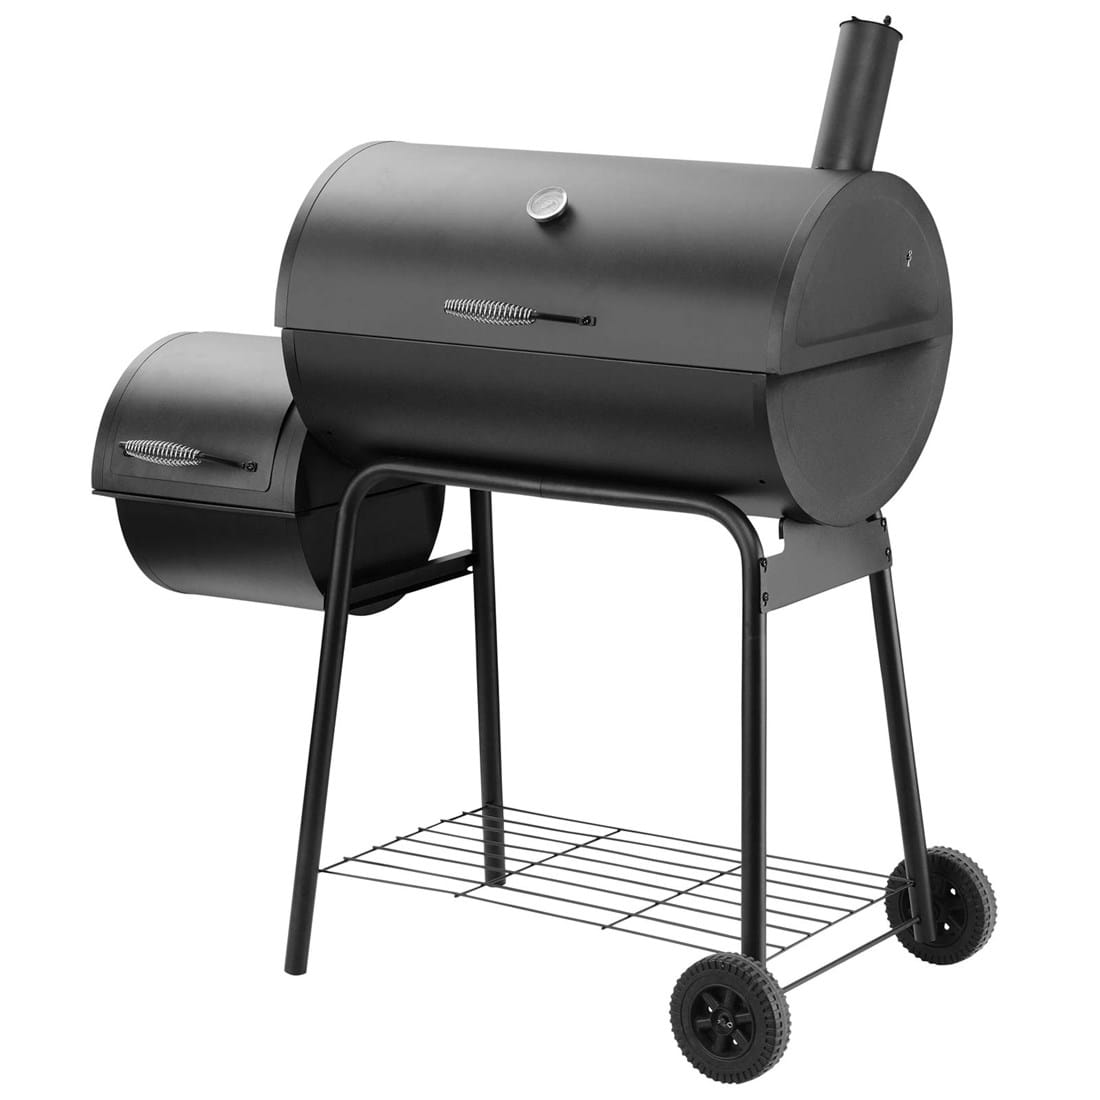 Charmate charcoal offset smoker grill